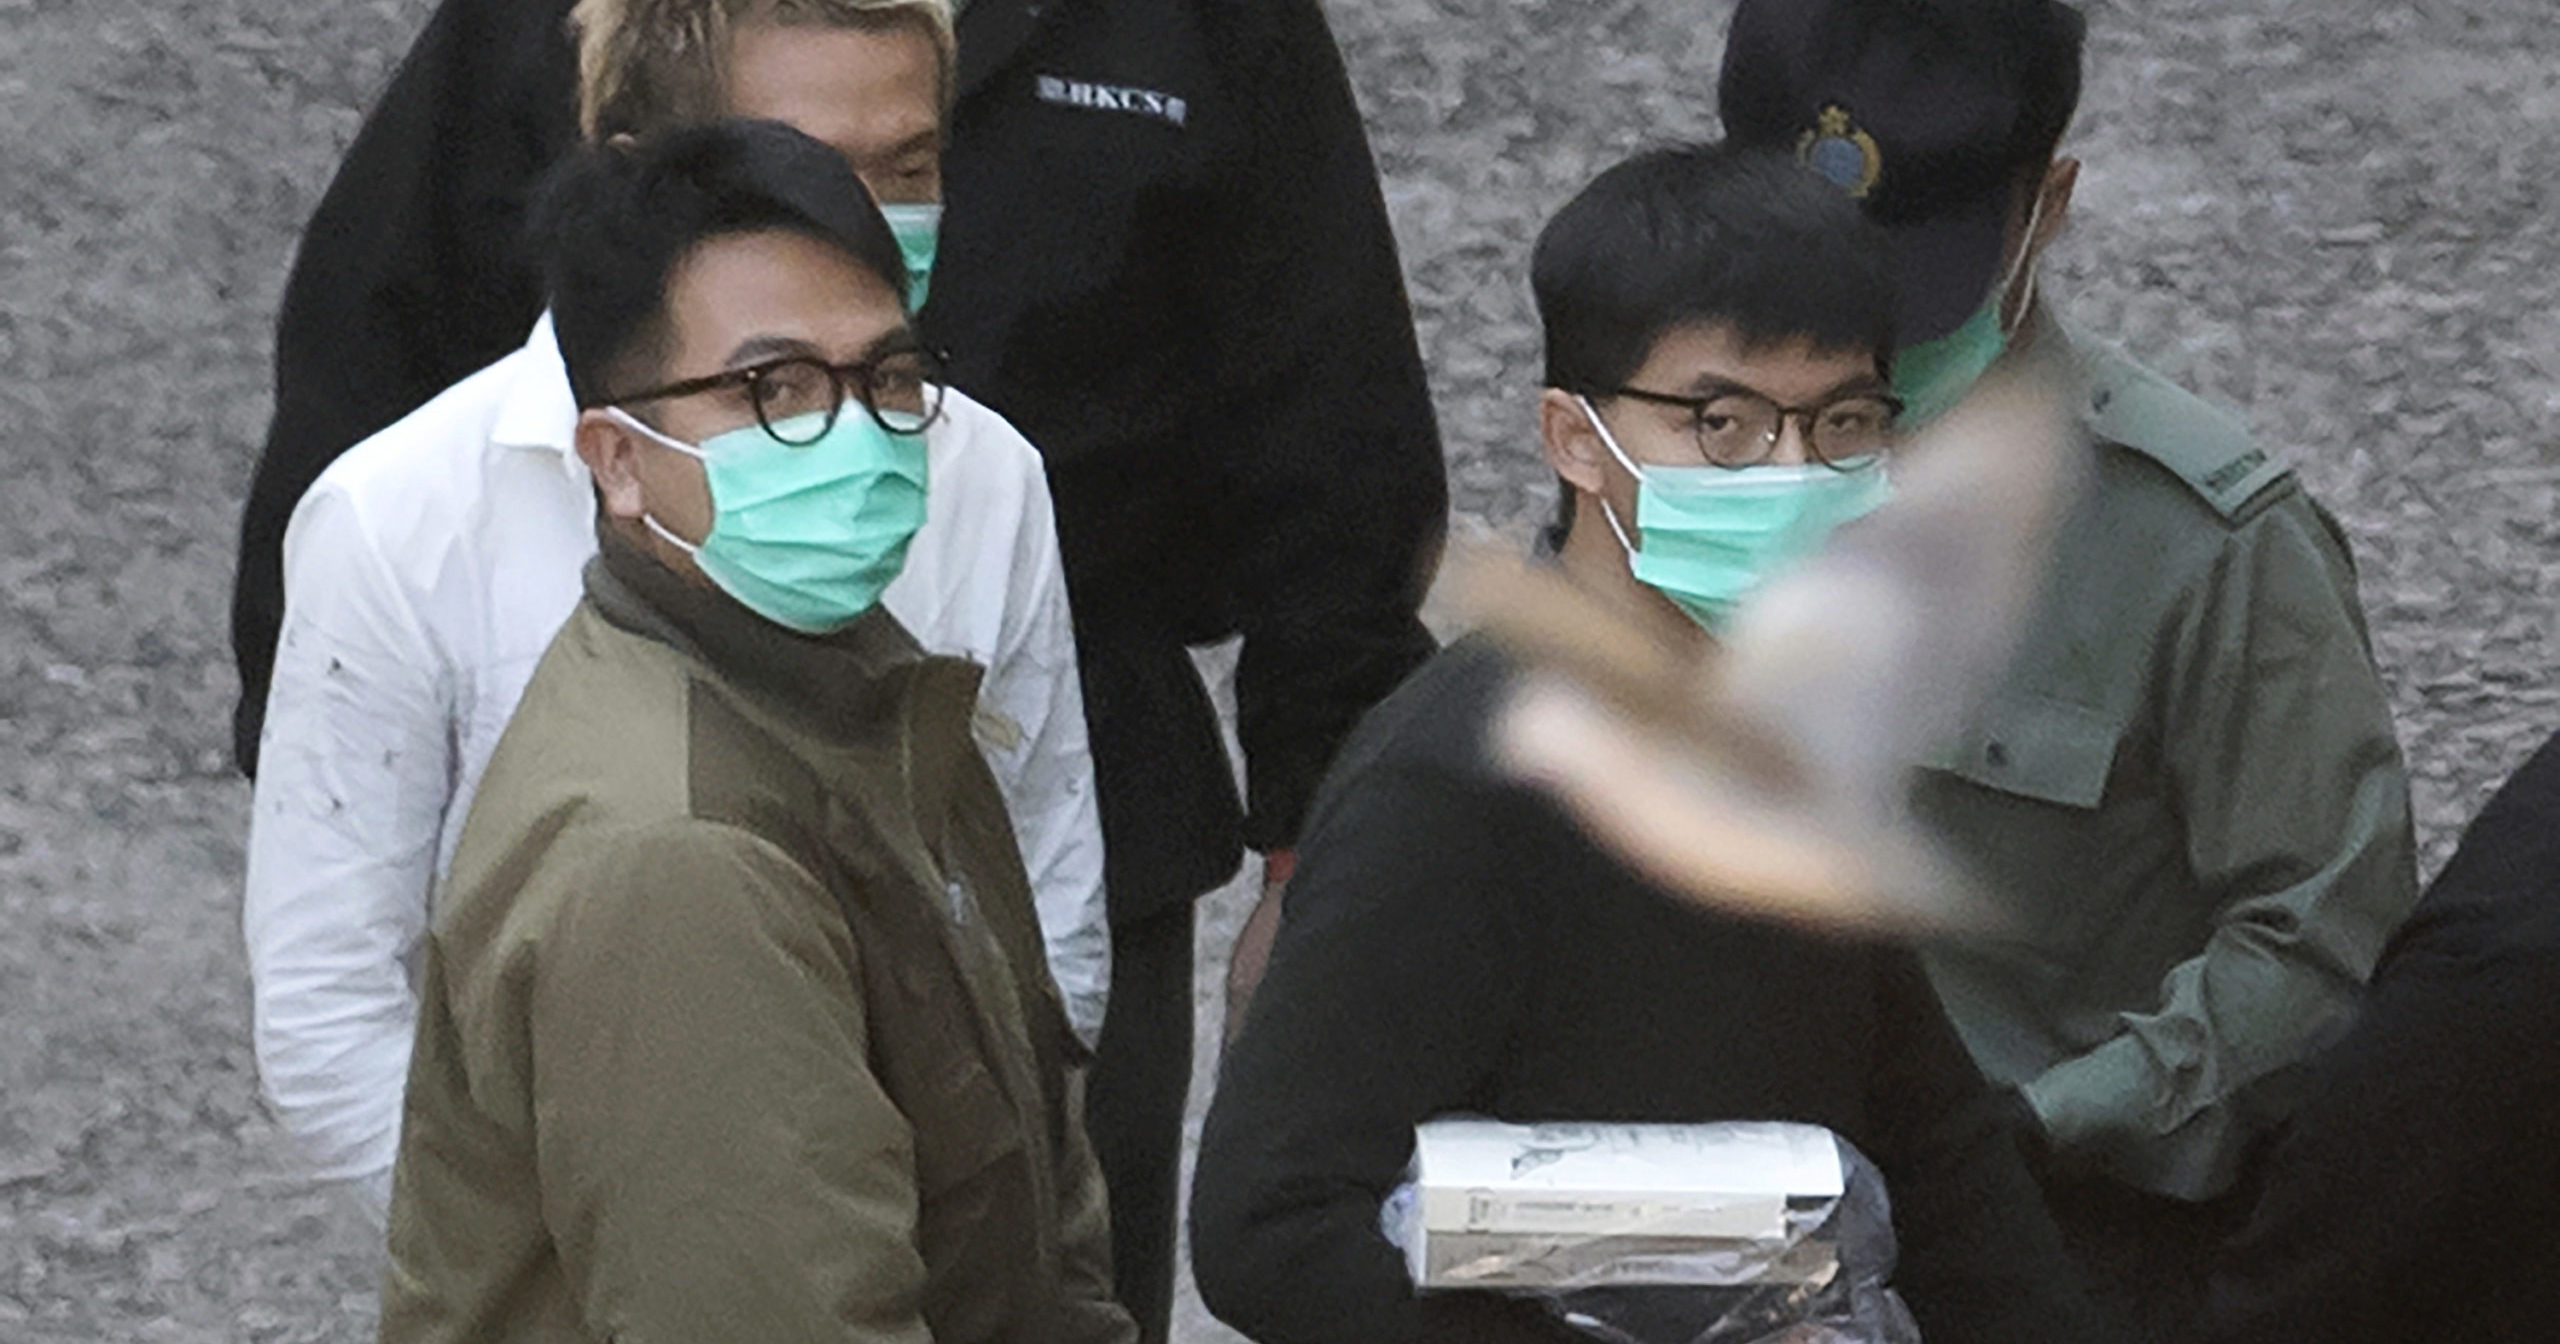 Pro-democracy activists Joshua Wong, right, and Ivan Lam are escorted into a prison van before appearing in a court in Hong Kong on Dec. 2, 2020.